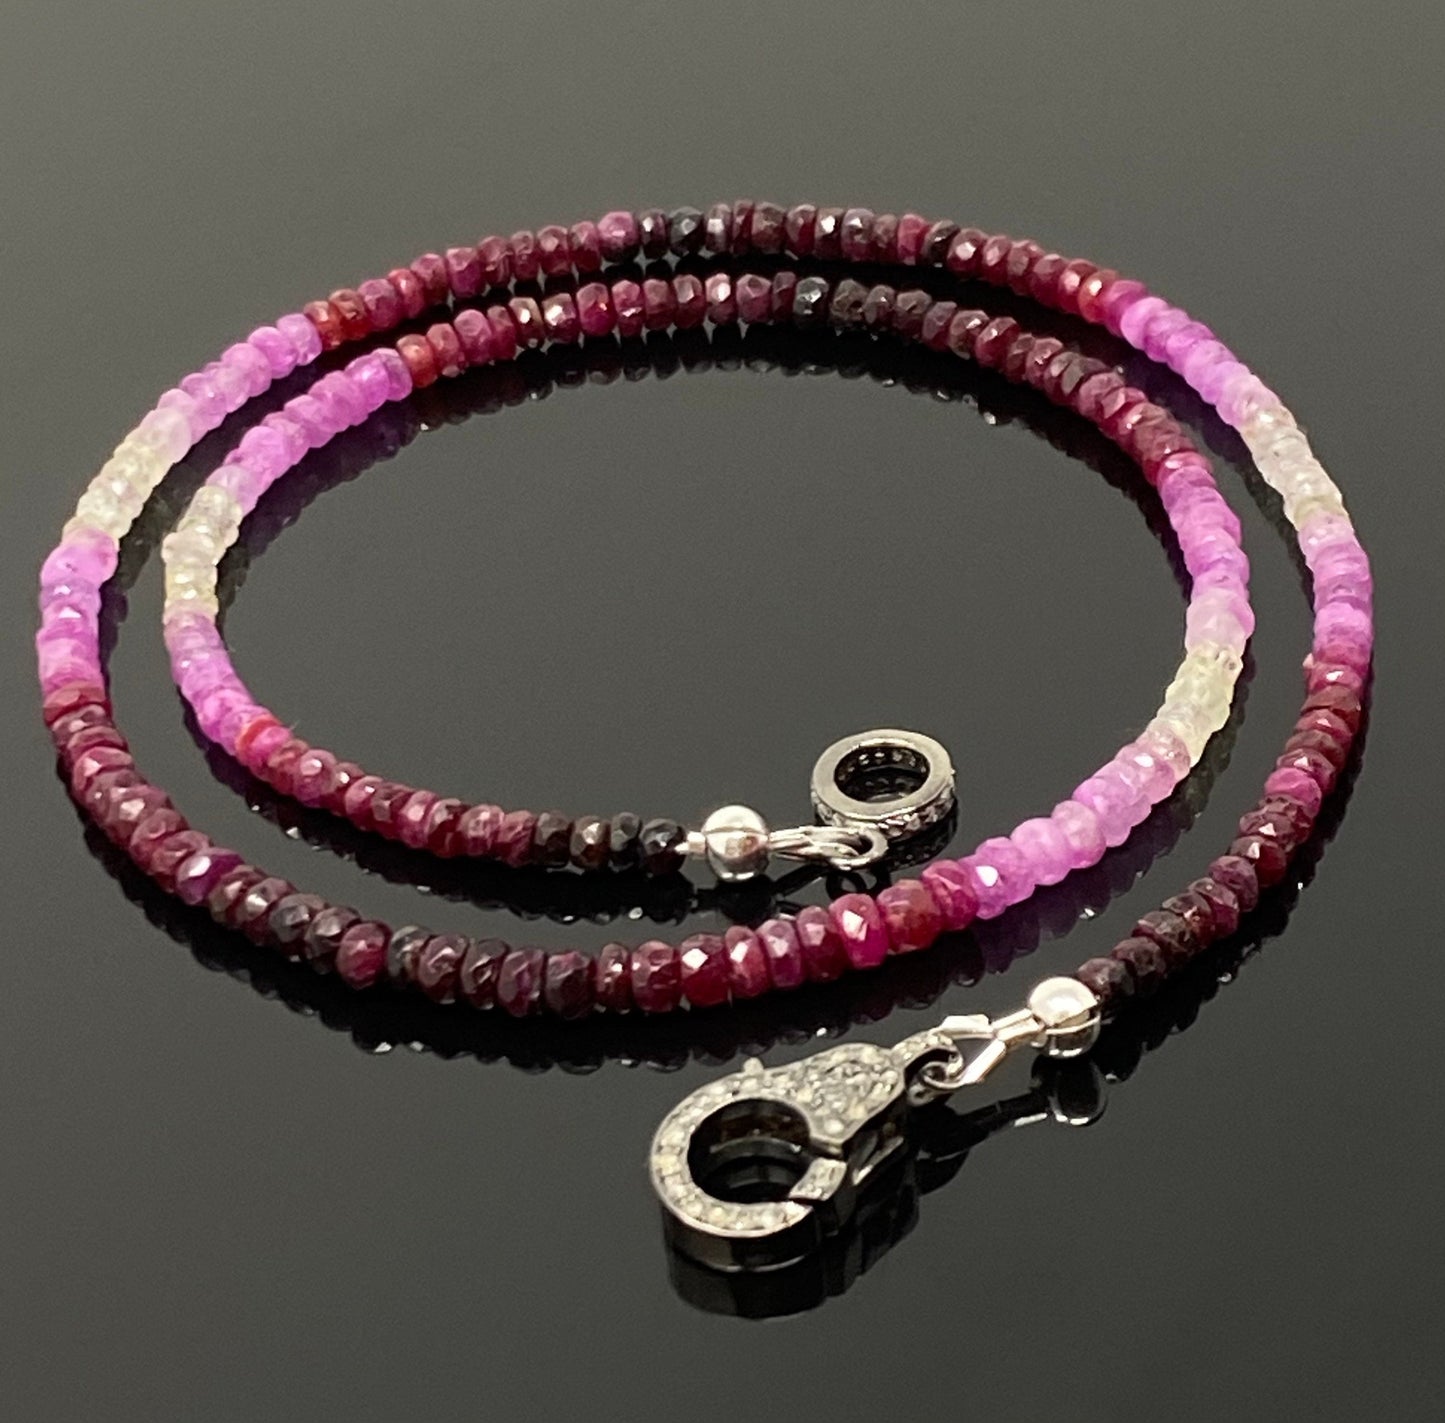 17.5" Genuine Ruby Necklace with Pave Diamond Clasp, Natural Shaded